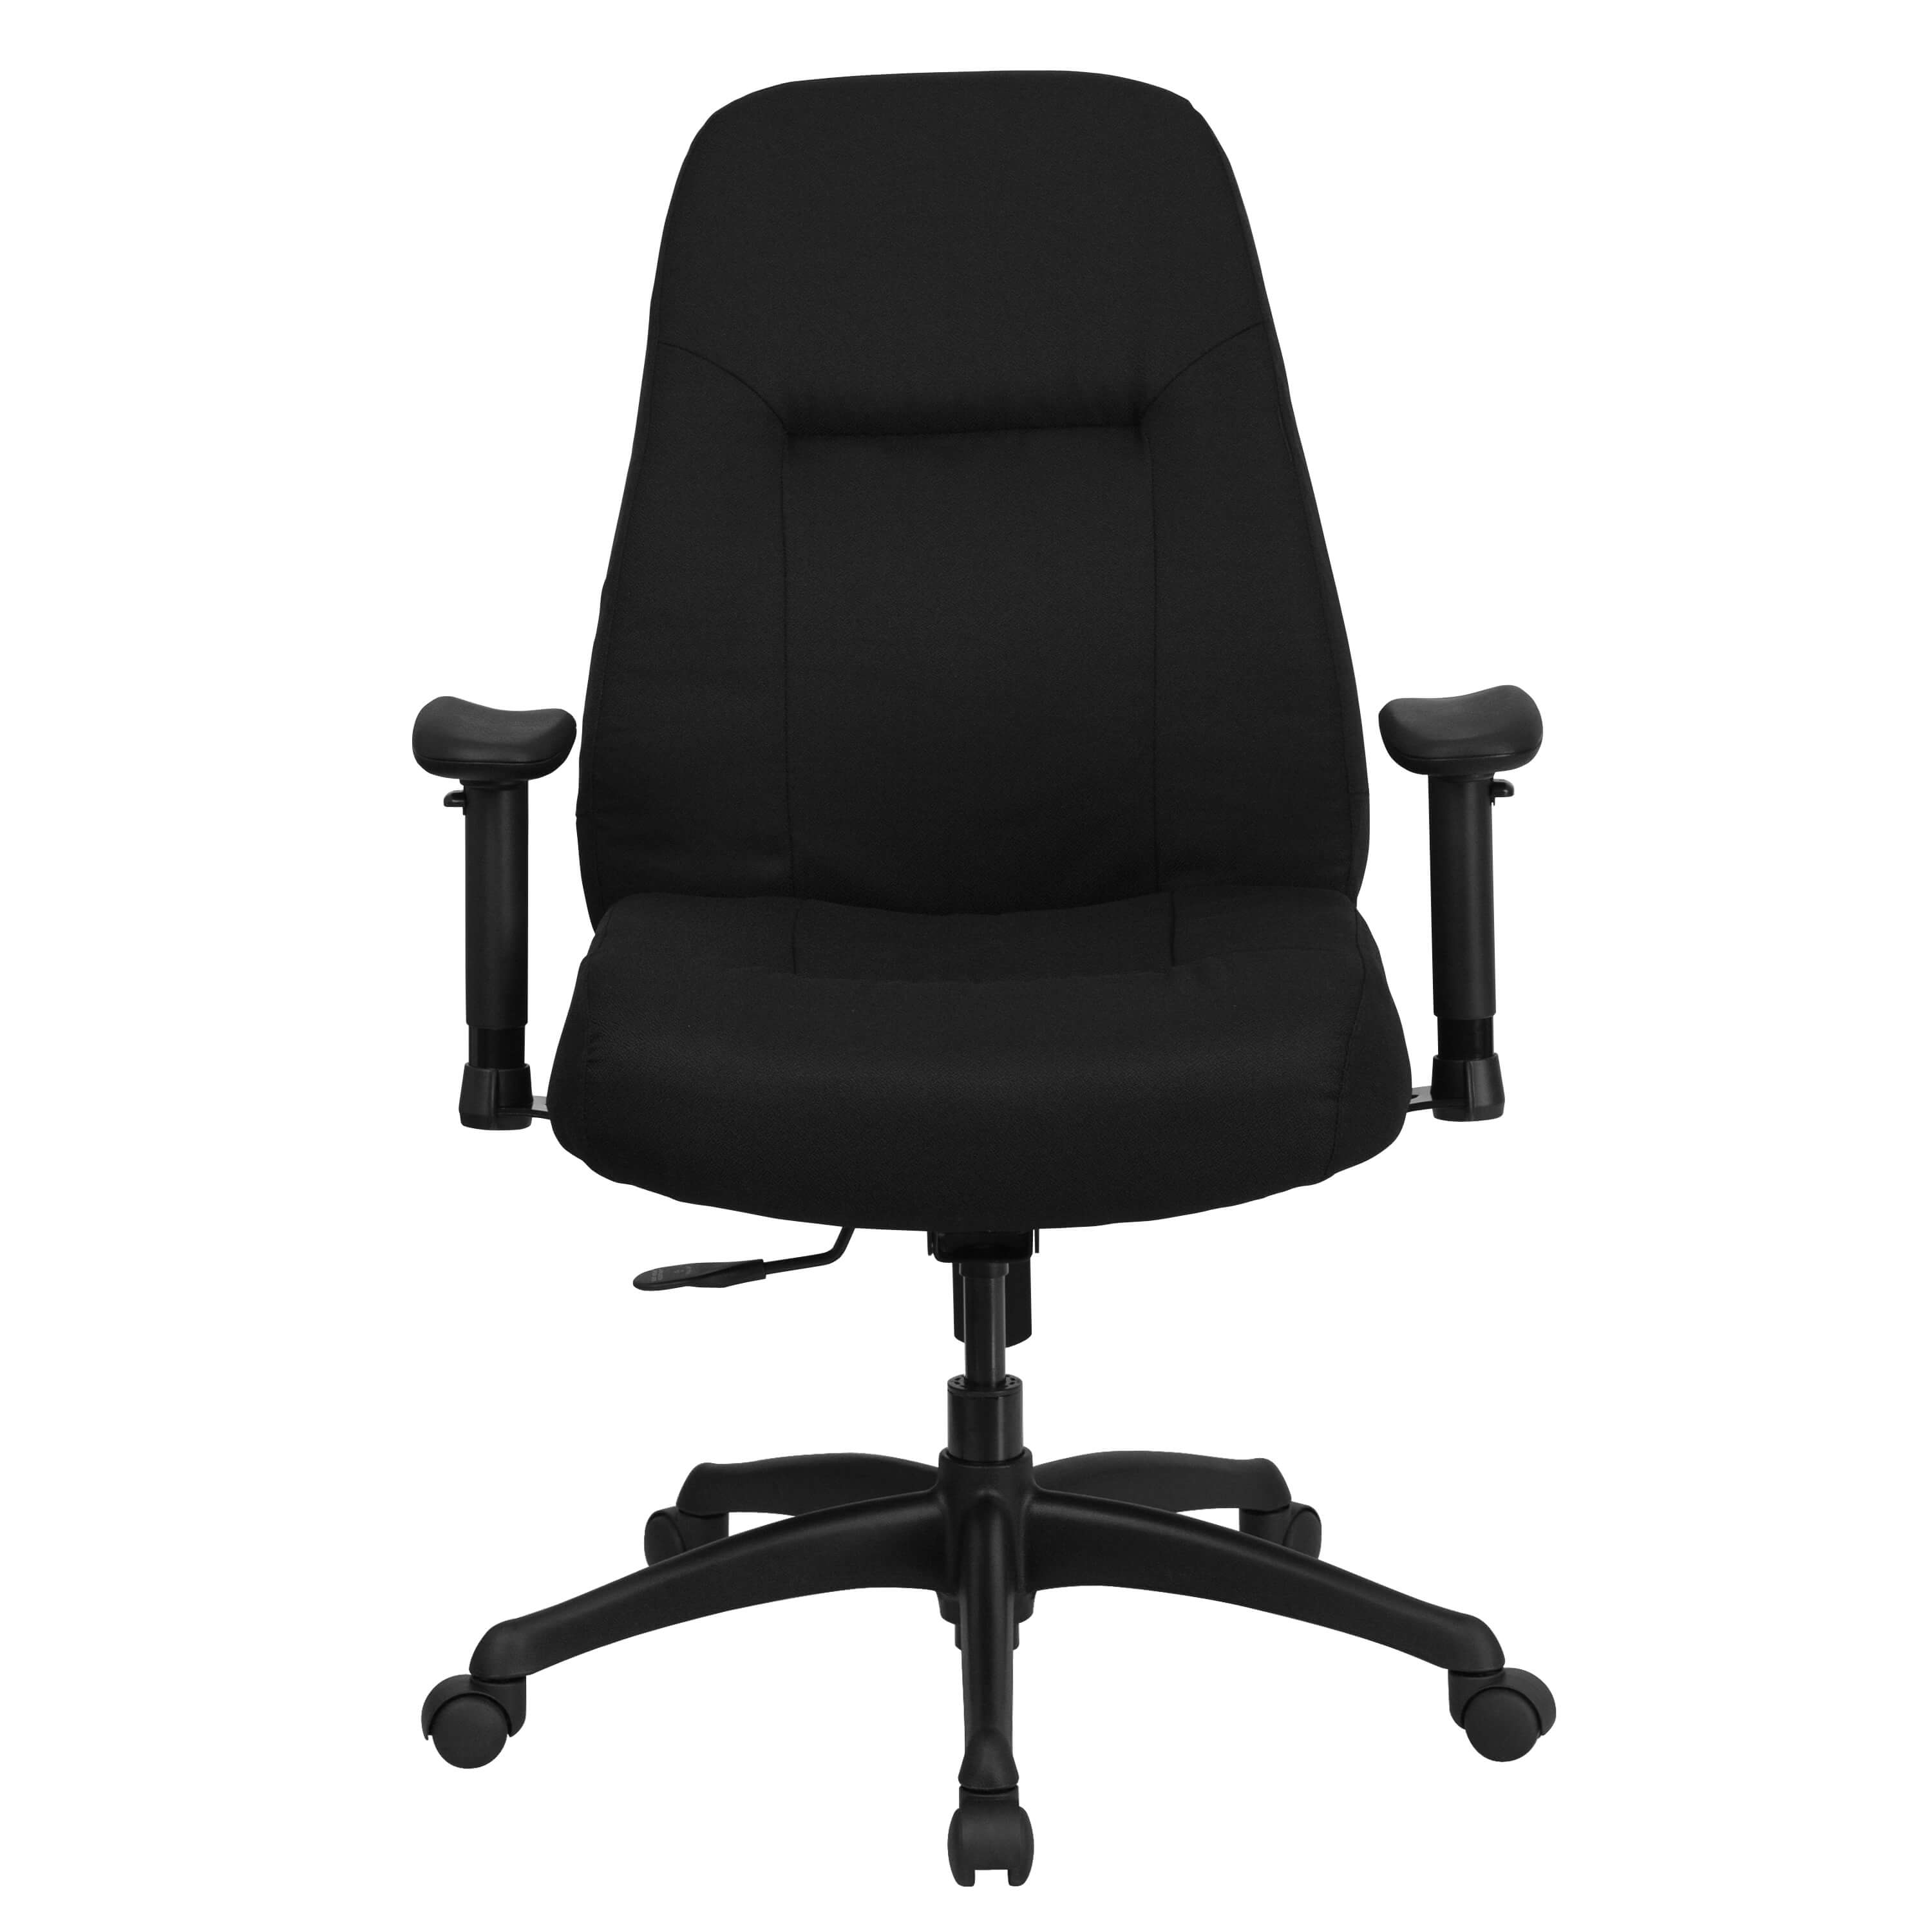 Heavy weight capacity office chair front view